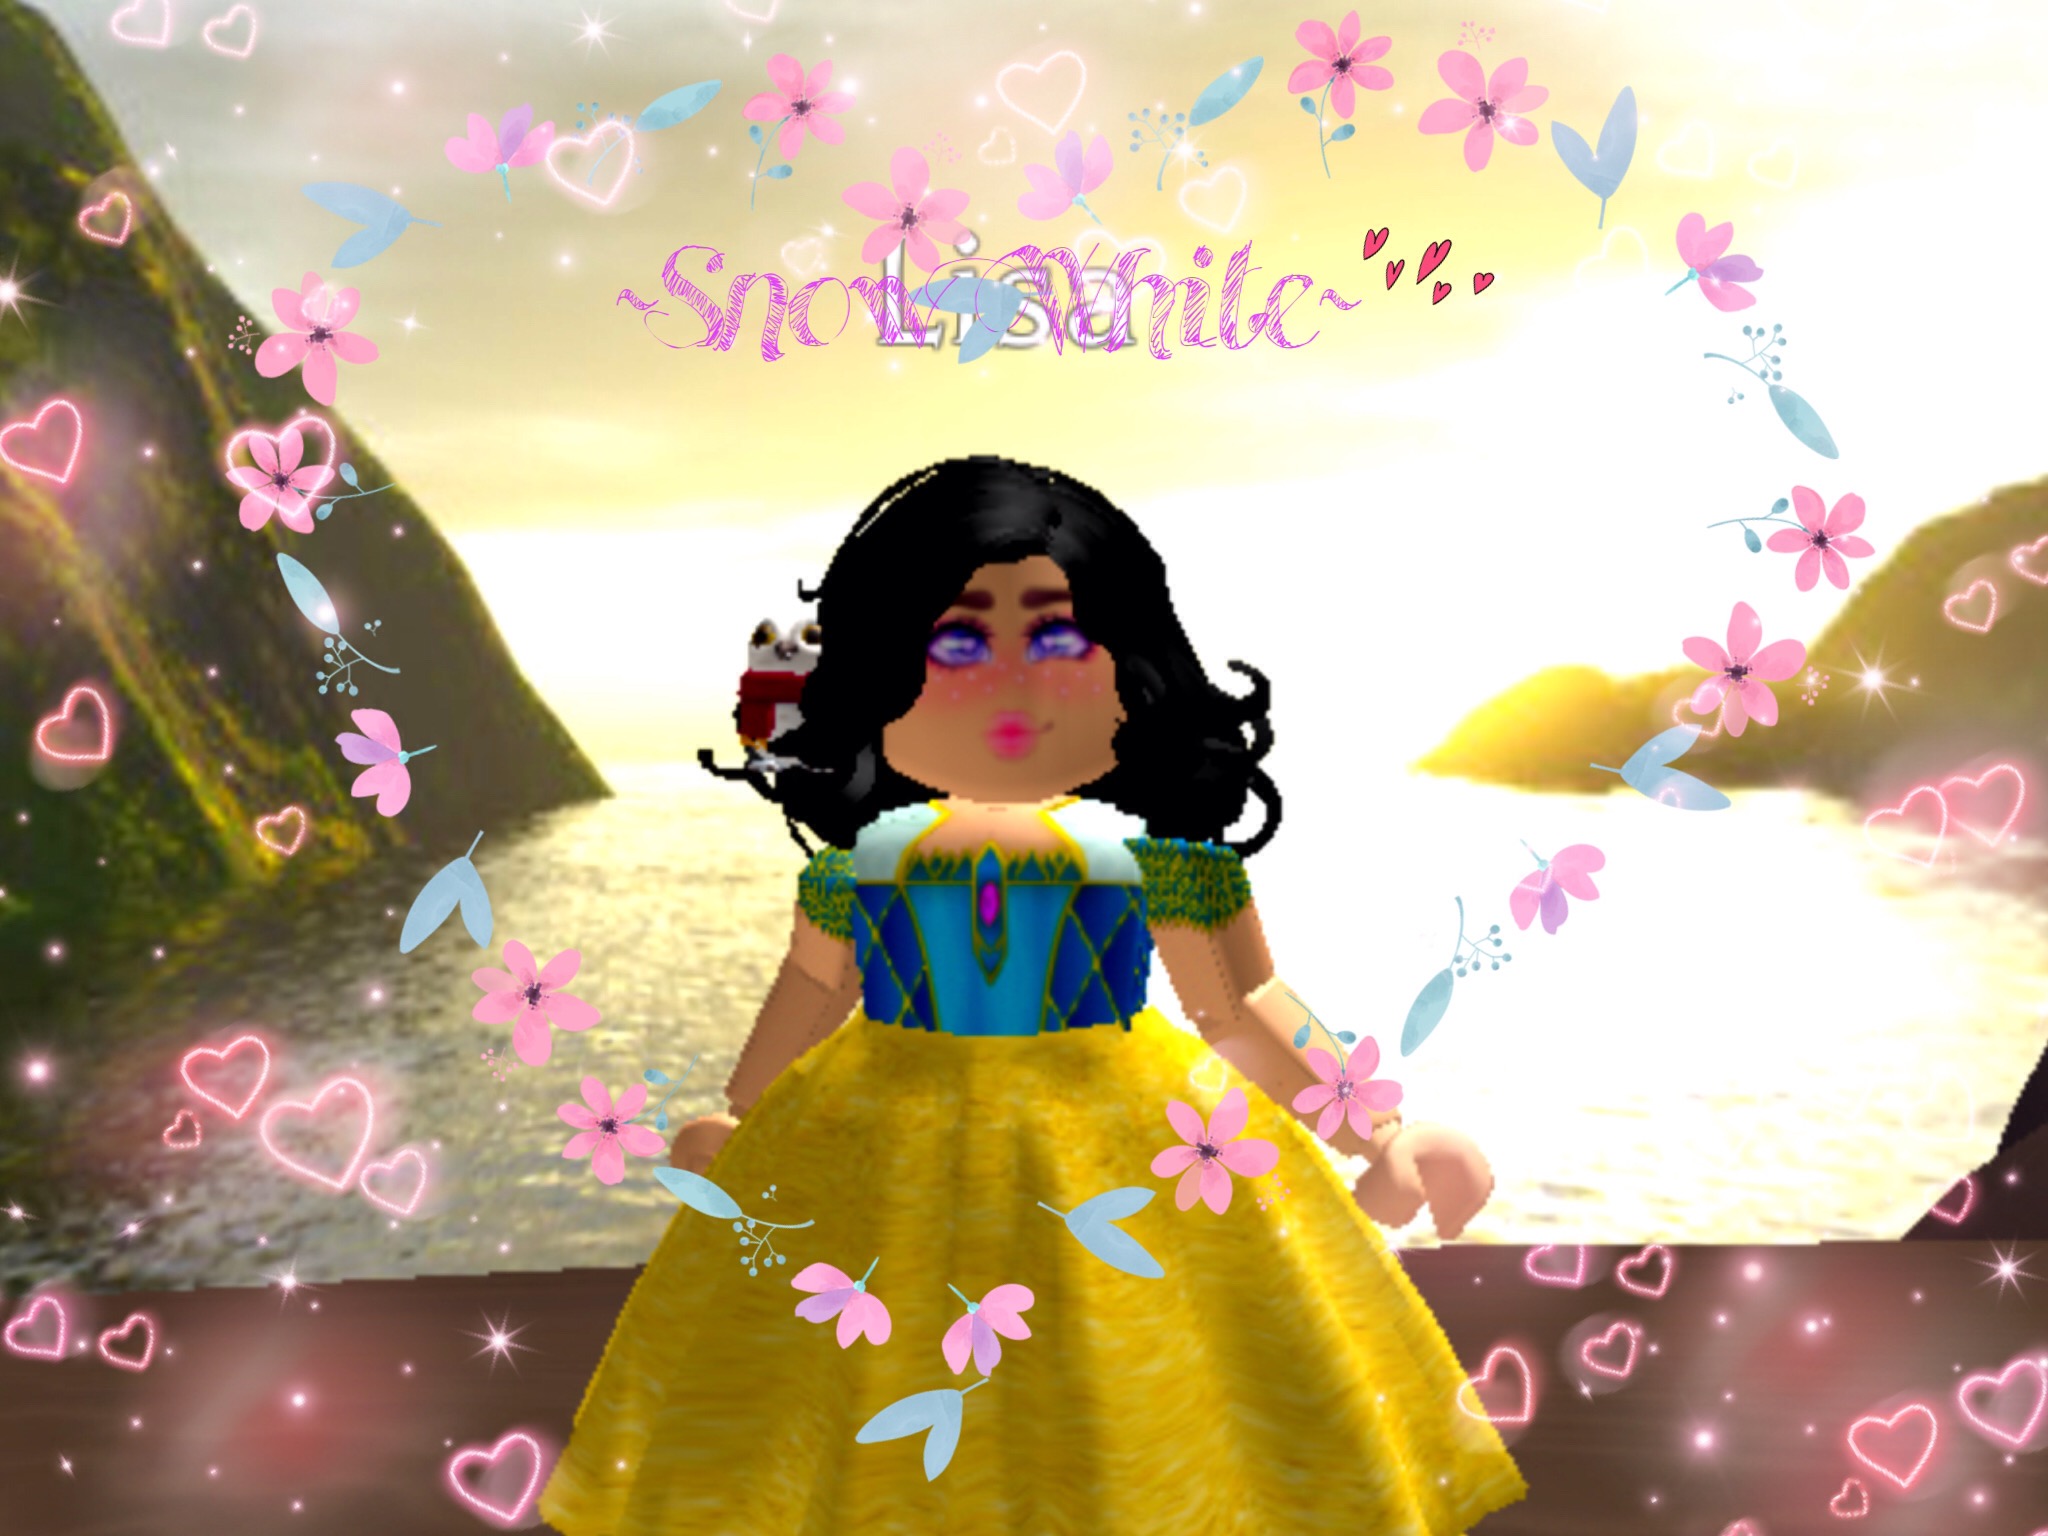 Snowwhite Roblox Royalehigh This Is For Cypernova - snowwhite roblox royalehigh this is for cypernova a youtuber